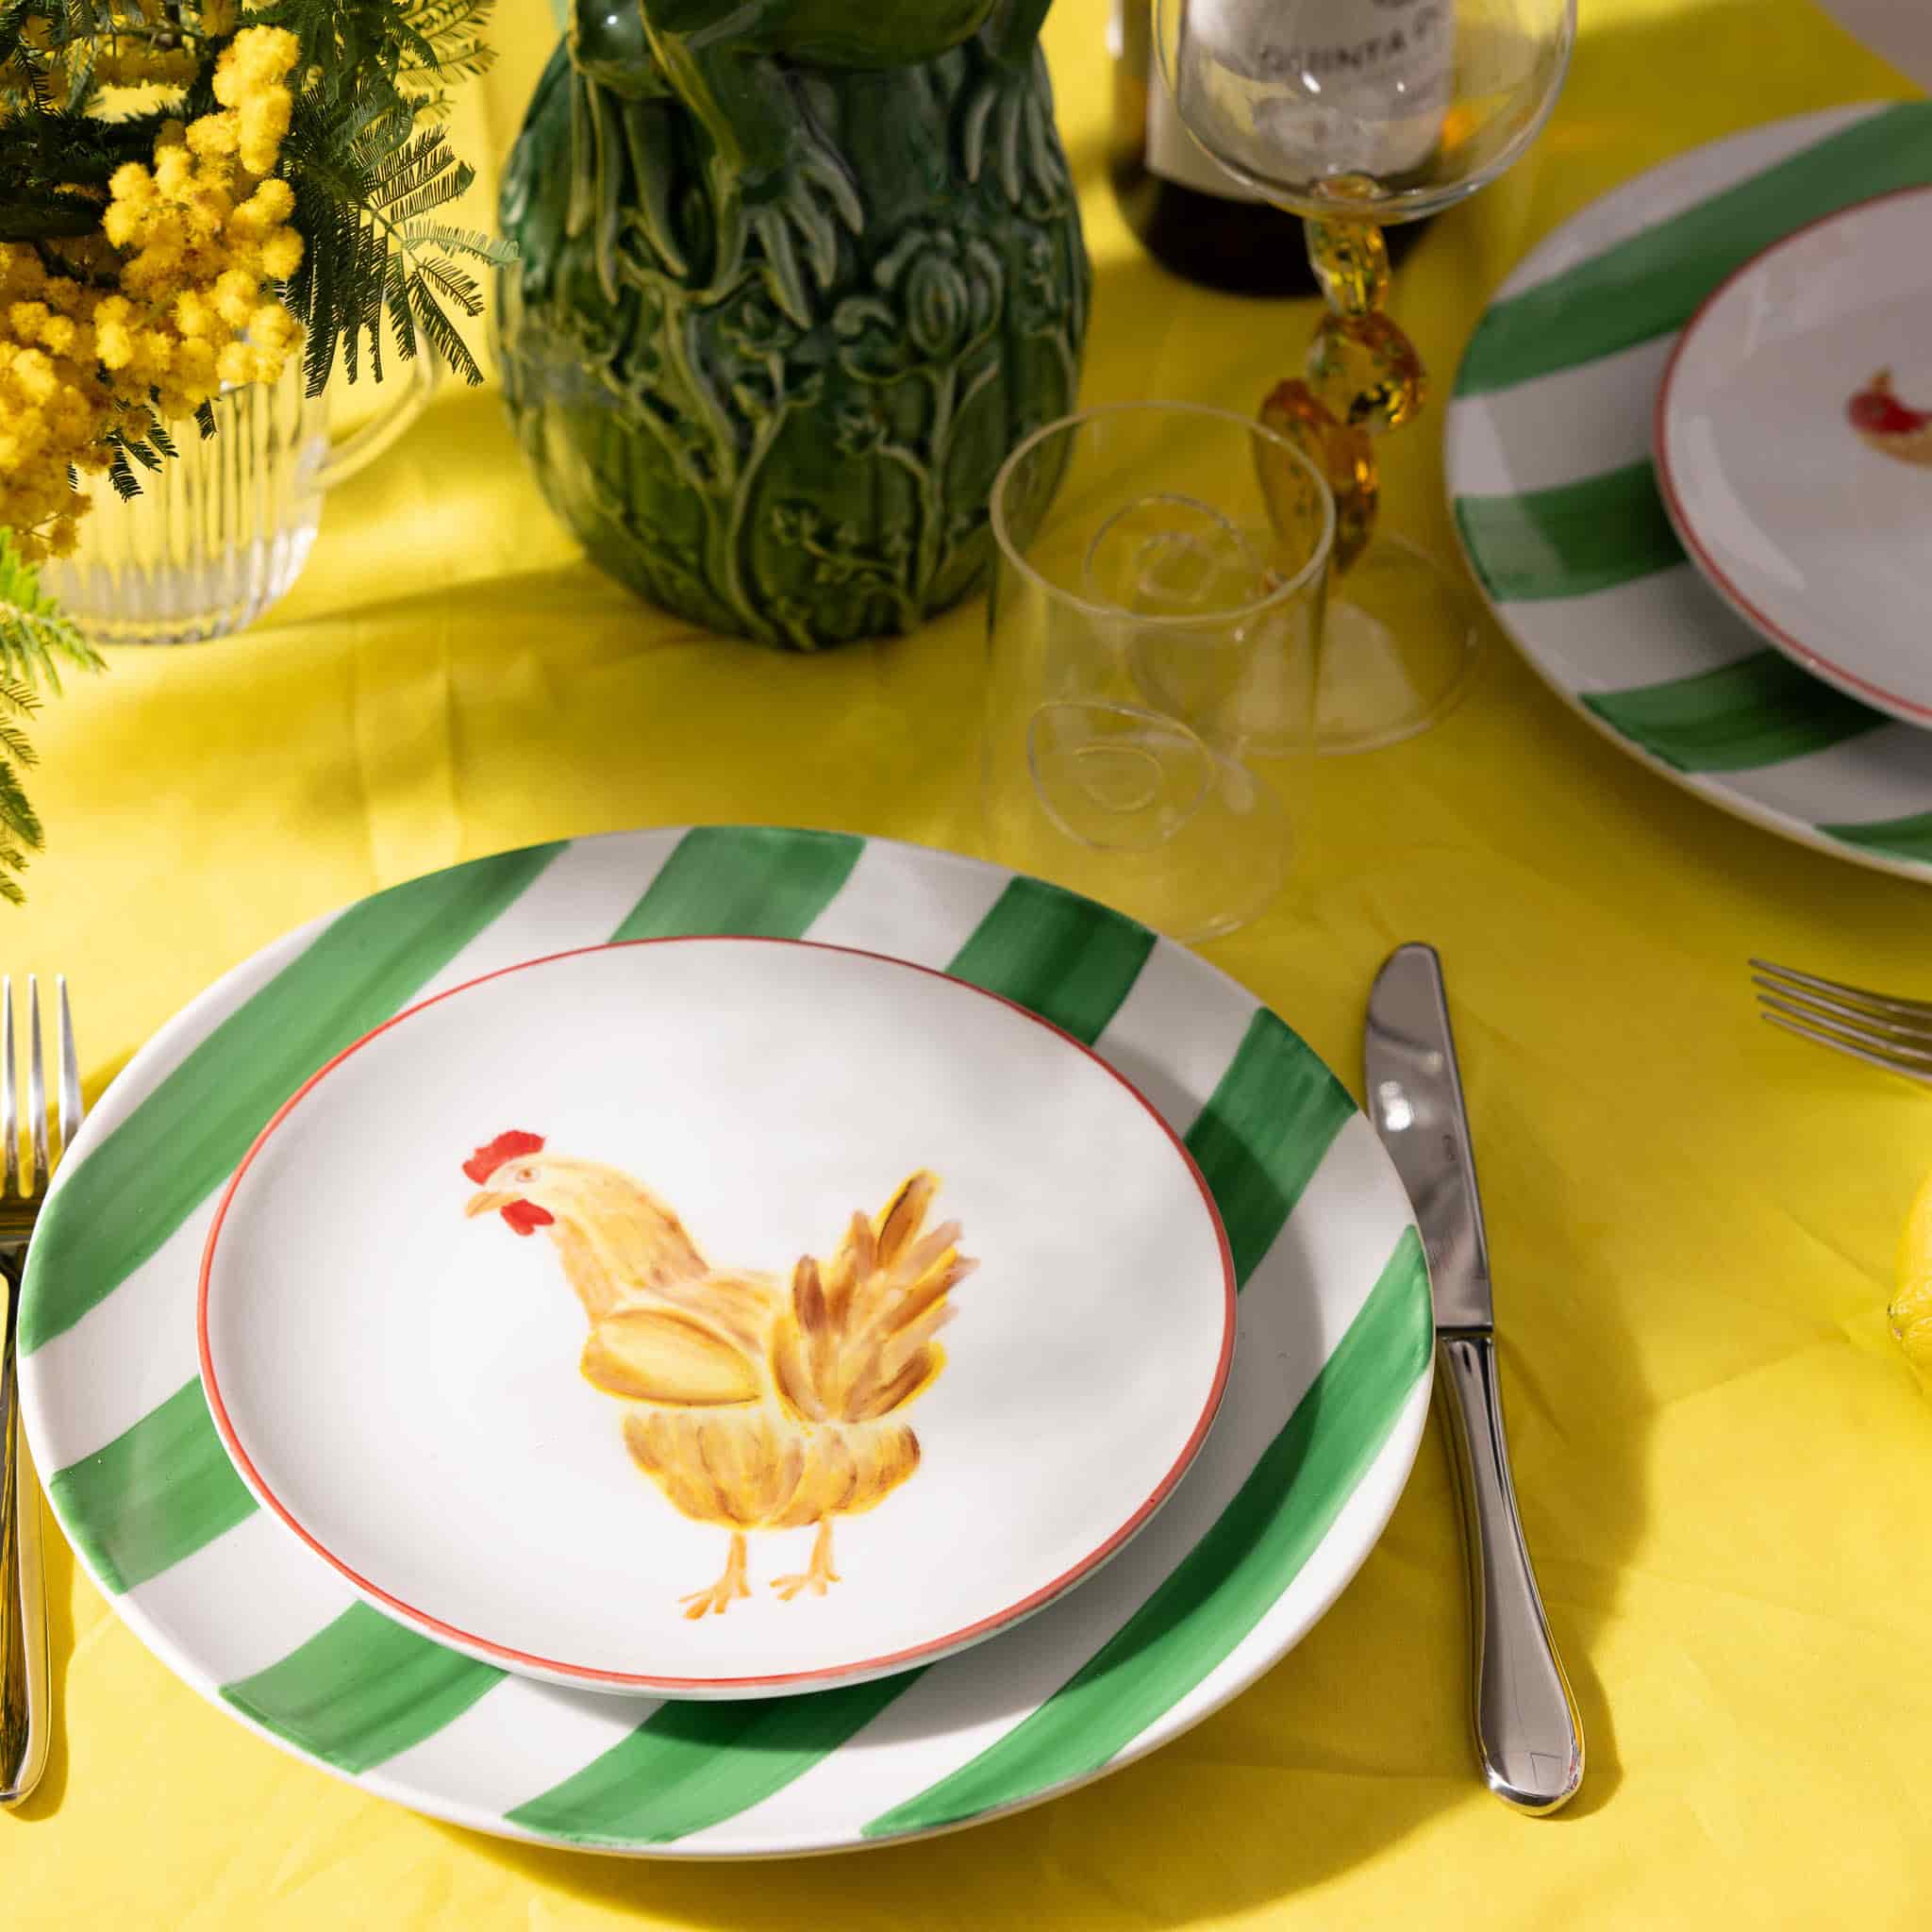 The Platera Conchi Chicken Porcelain Side Plate, 21cm